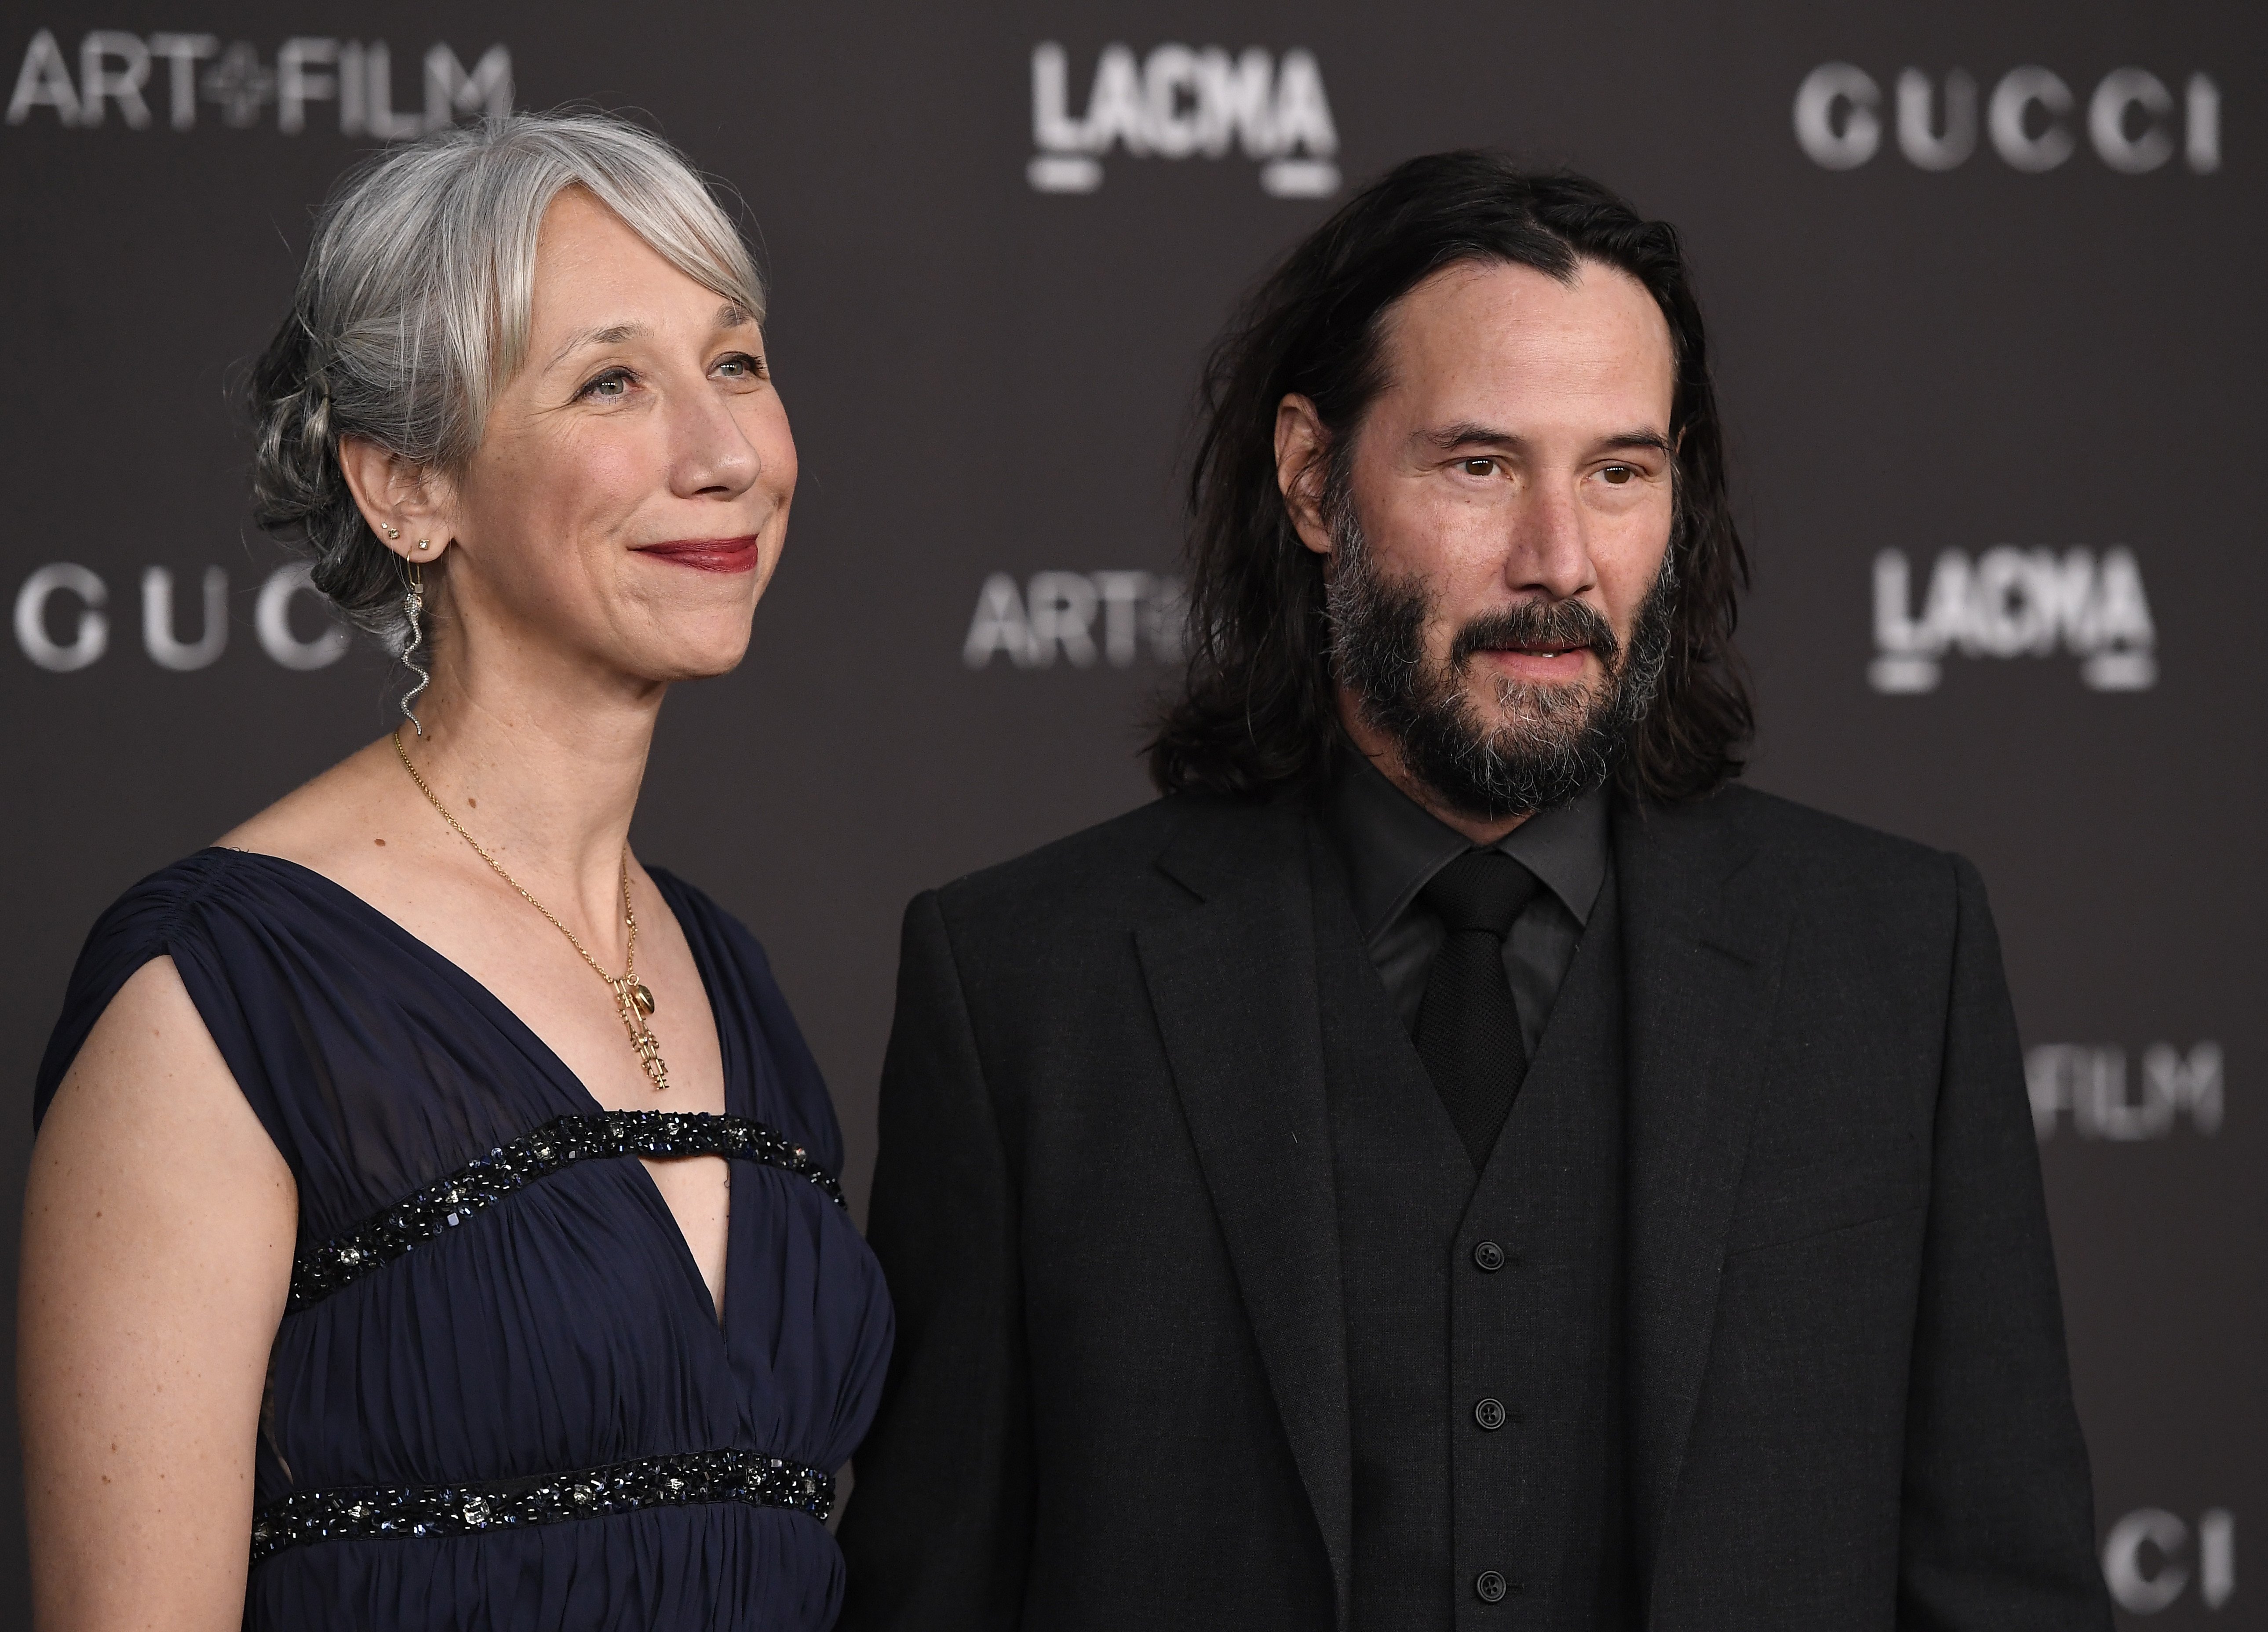 Alexandra Grant and Keanu Reeves attend the 2019 LACMA 2019 Art + Film Gala Presented By Gucci on November 02, 2019 in Los Angeles, California. | Source: Getty Images